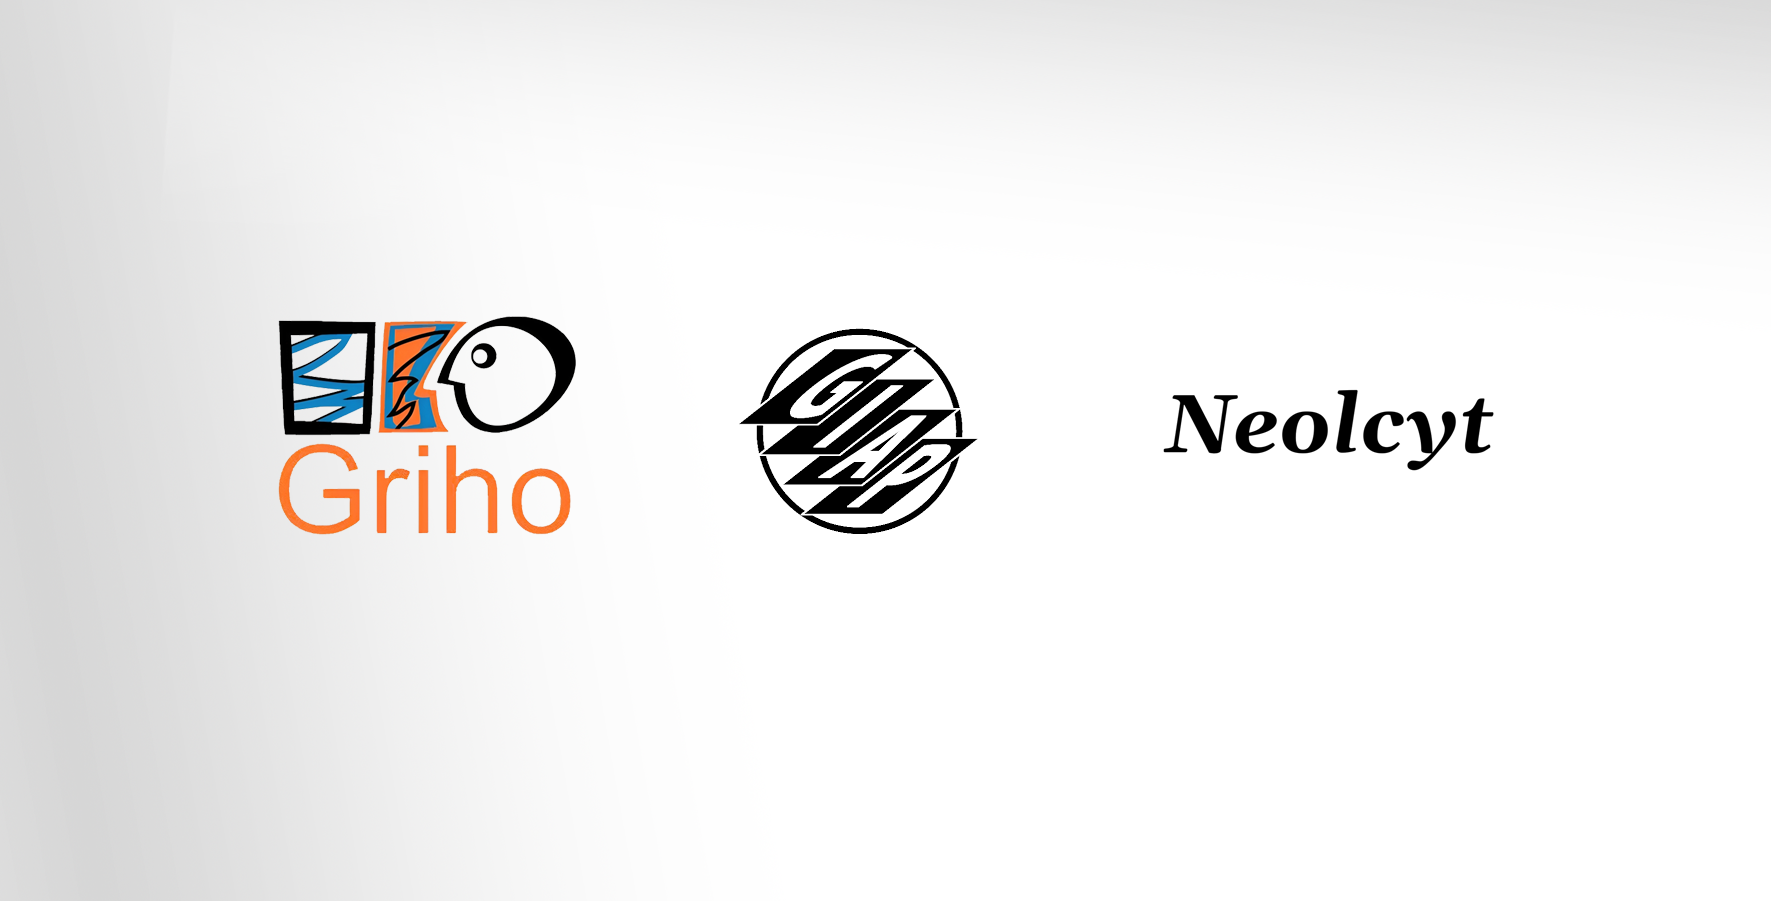 Logos for GRIHO, GIAP, and Neolcyt.